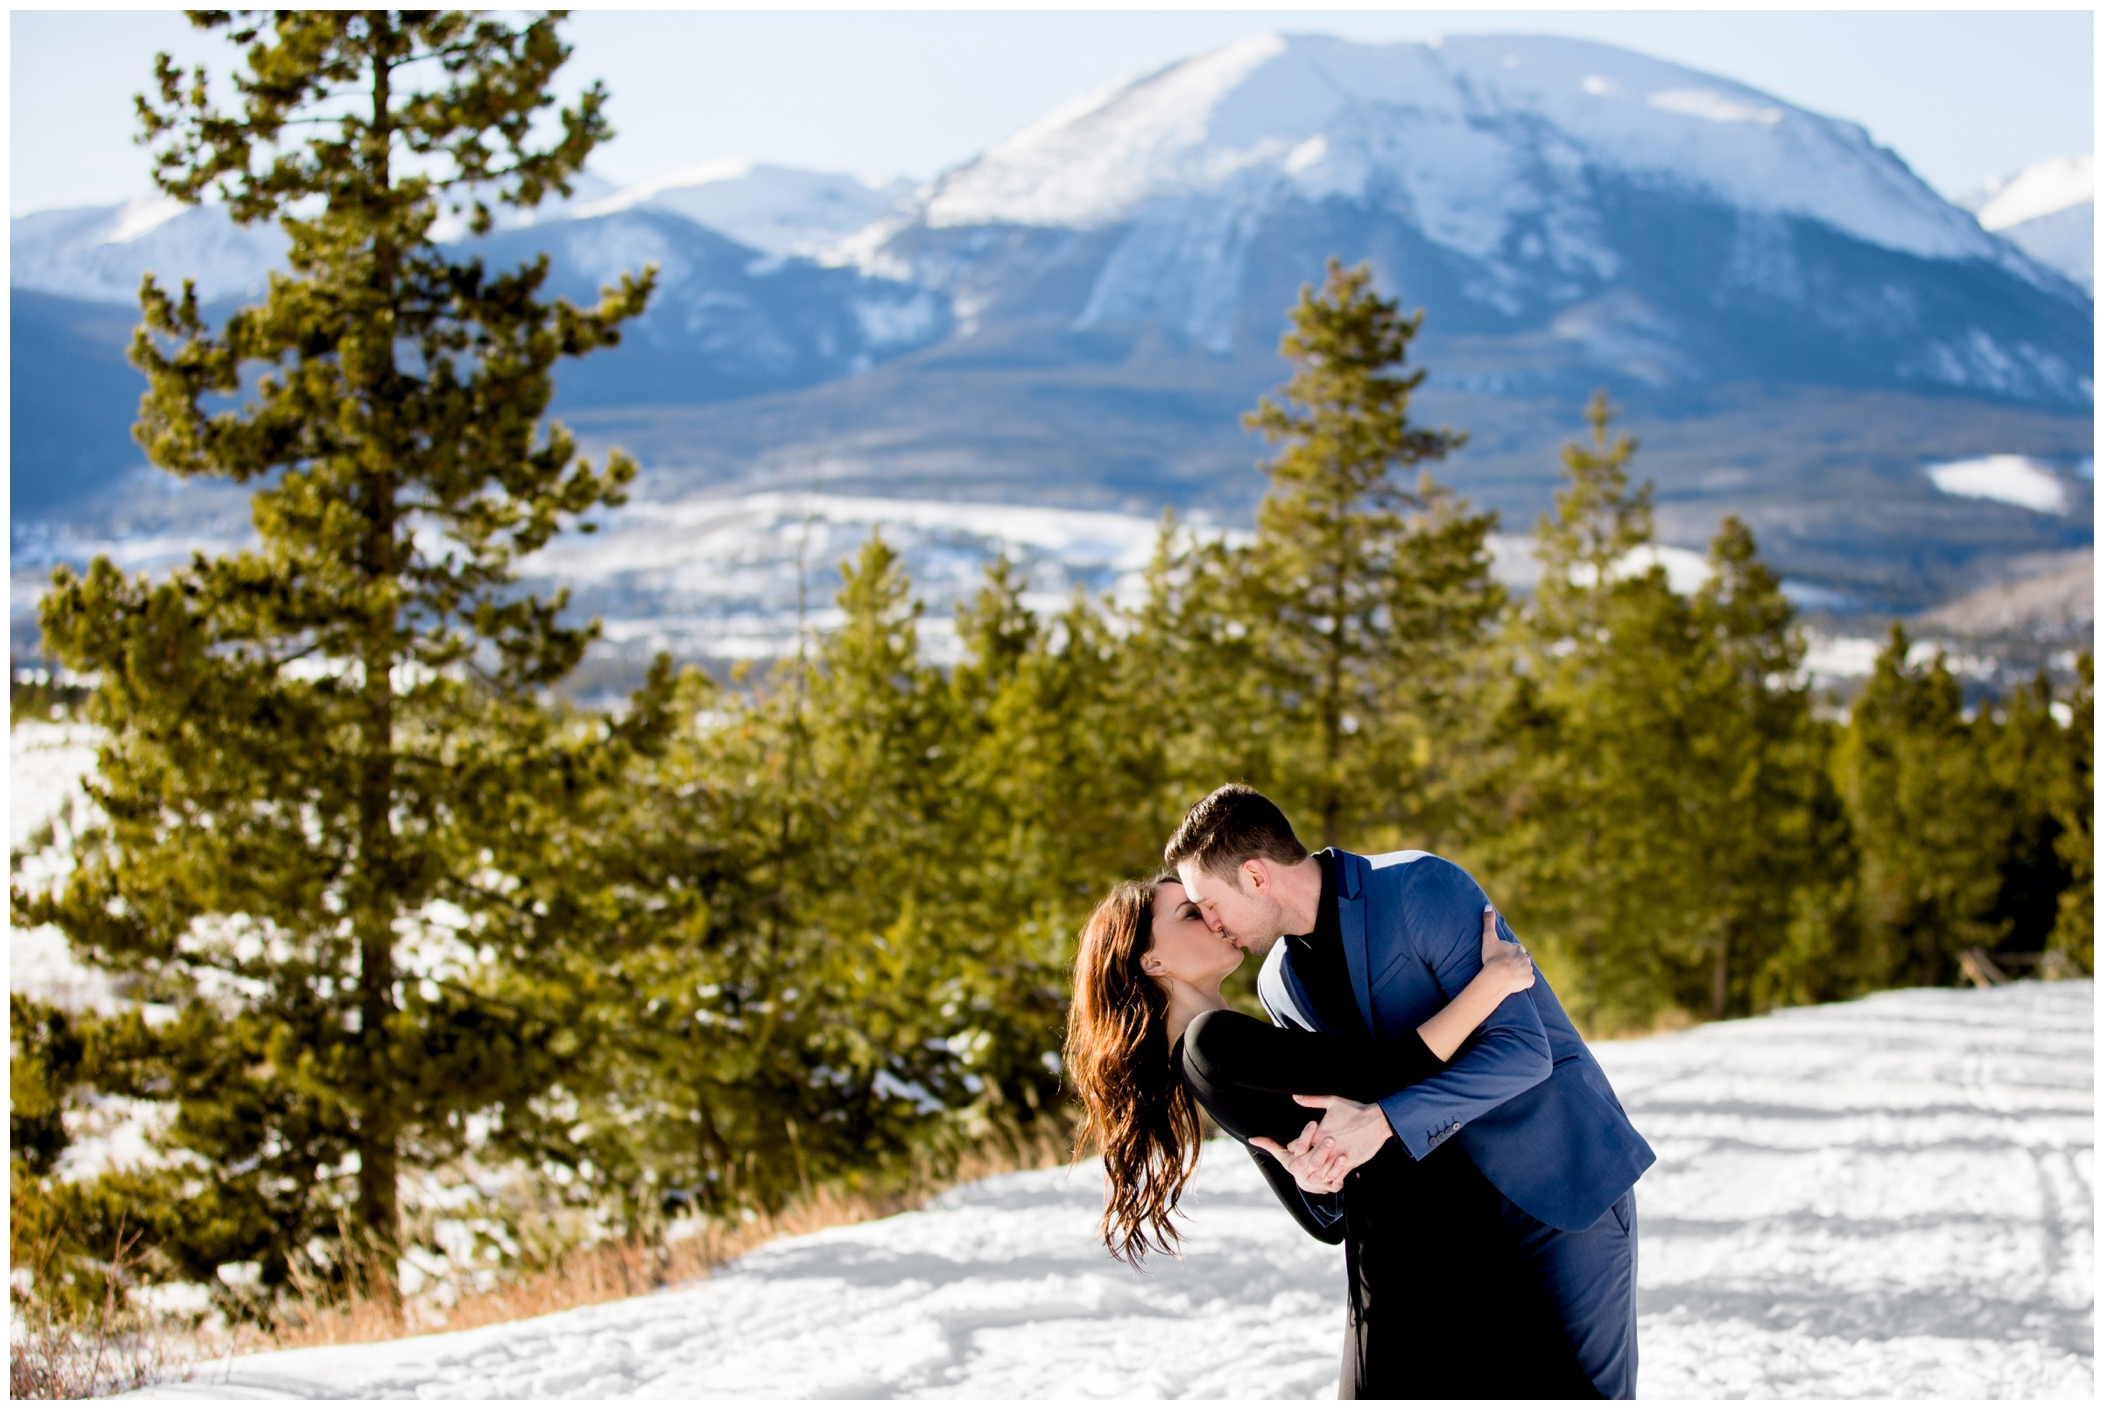 Colorado winter engagement photography in the snow